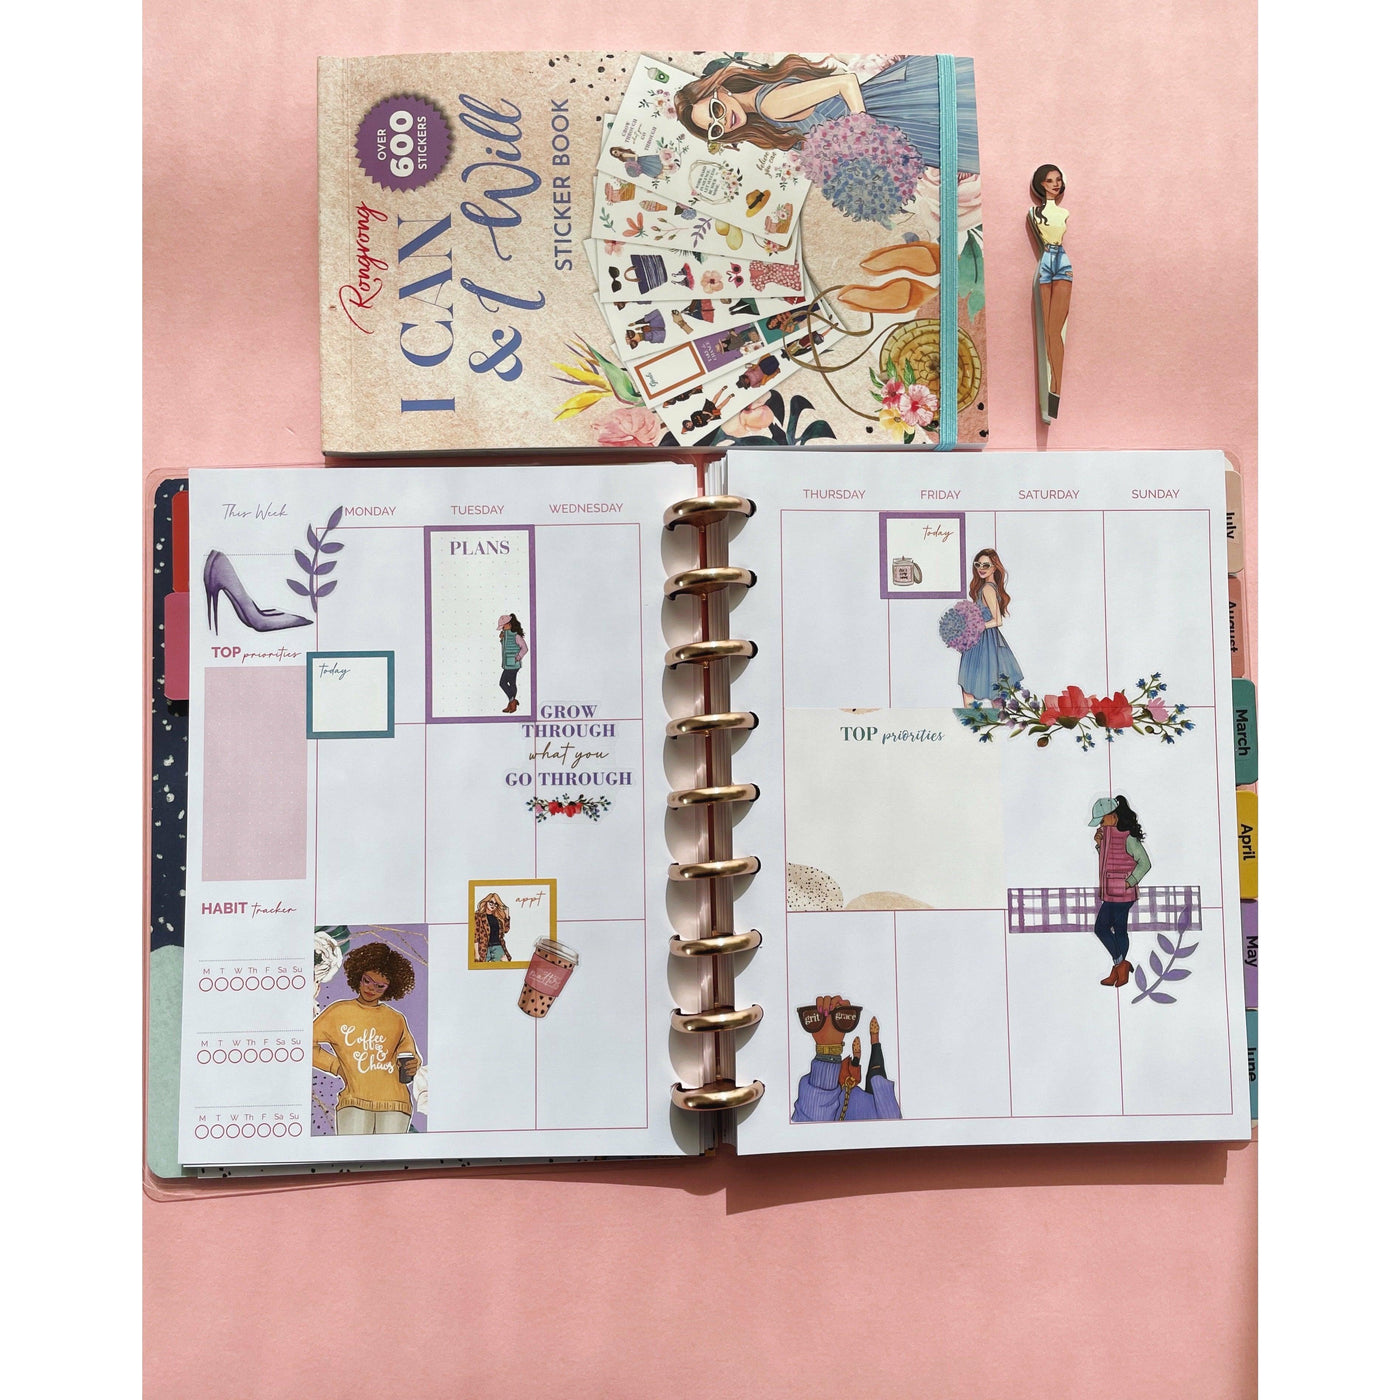 I Can & I Will Planner + Stickers Bundle